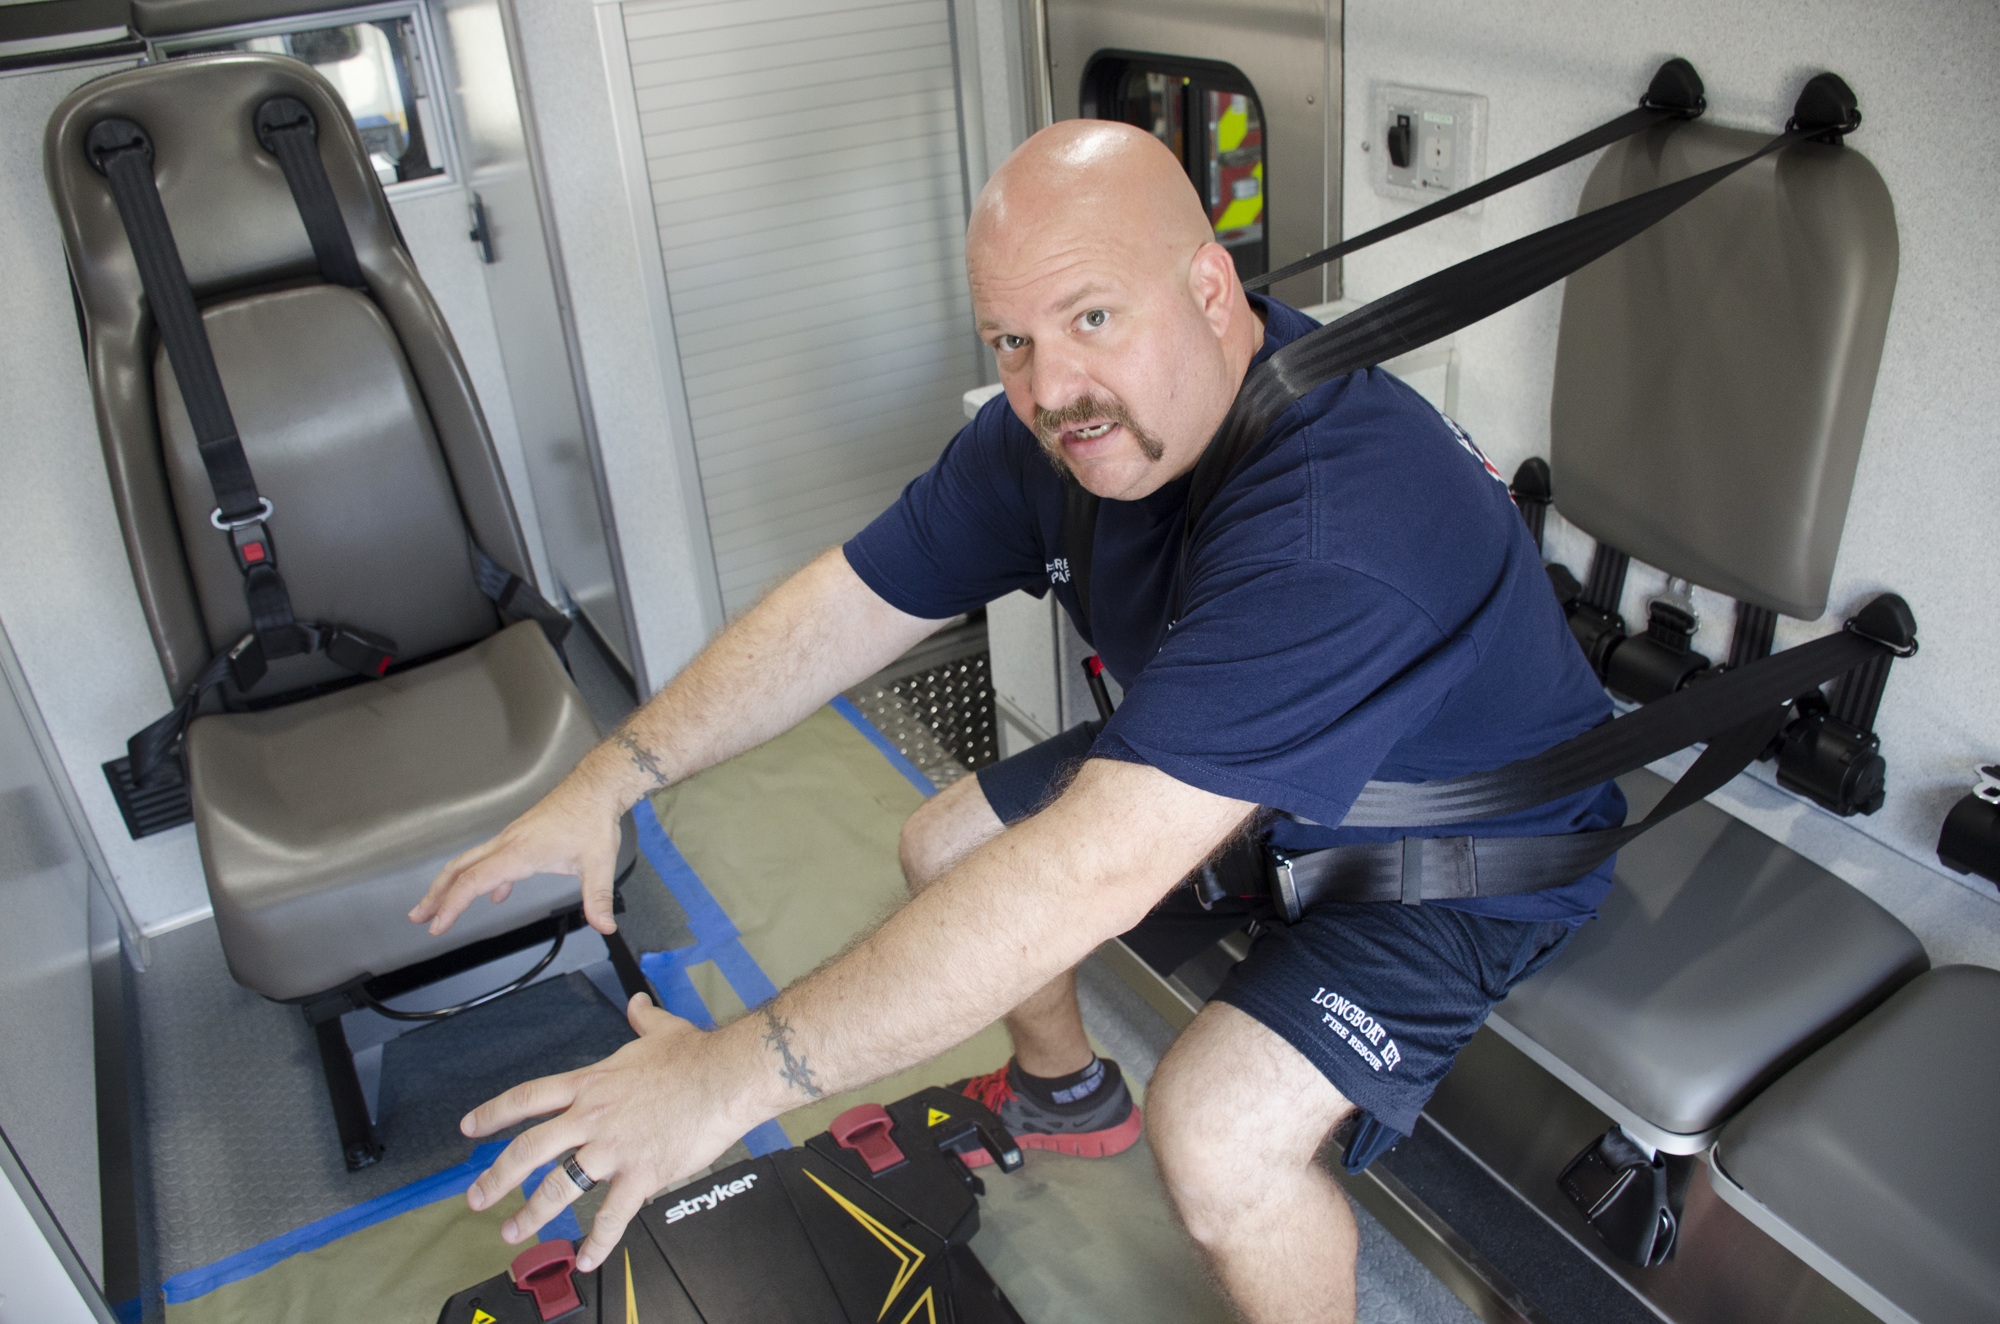 These safety straps are designed to give paramedics leverage to reach over and treat patients while staying connected to the vehicle.